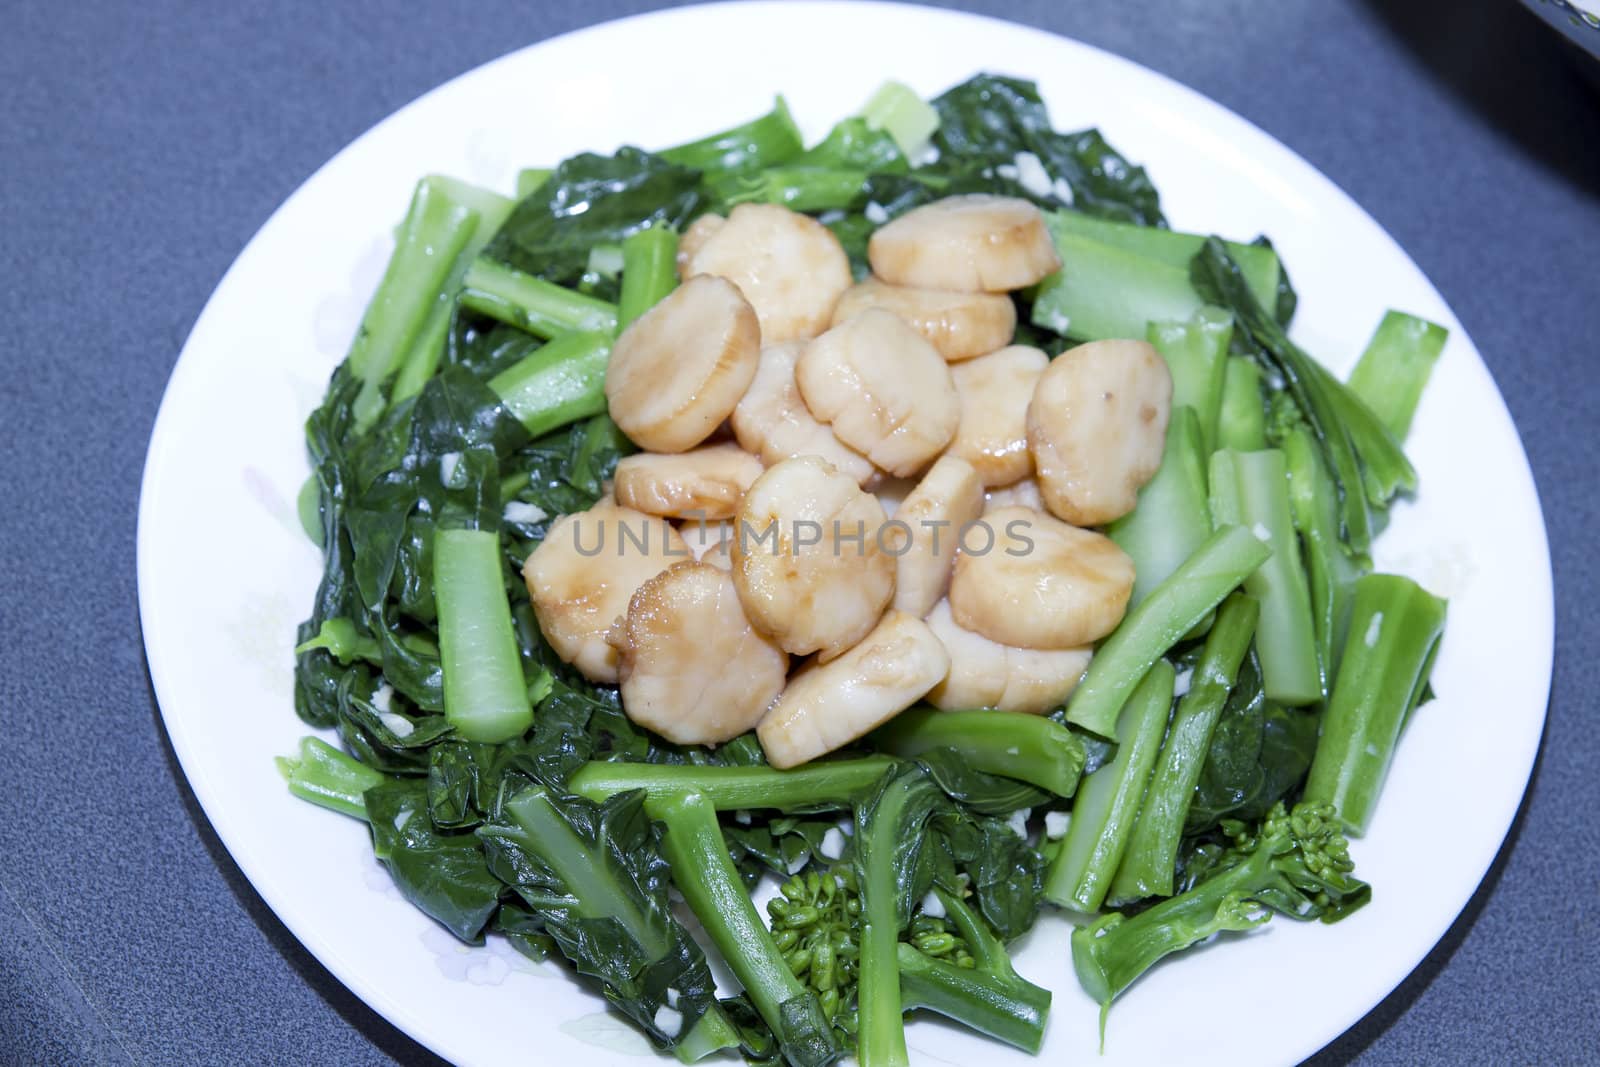 Stir Fry Scallops and Chinese Broccoli Vegetable Dish by Davidgn